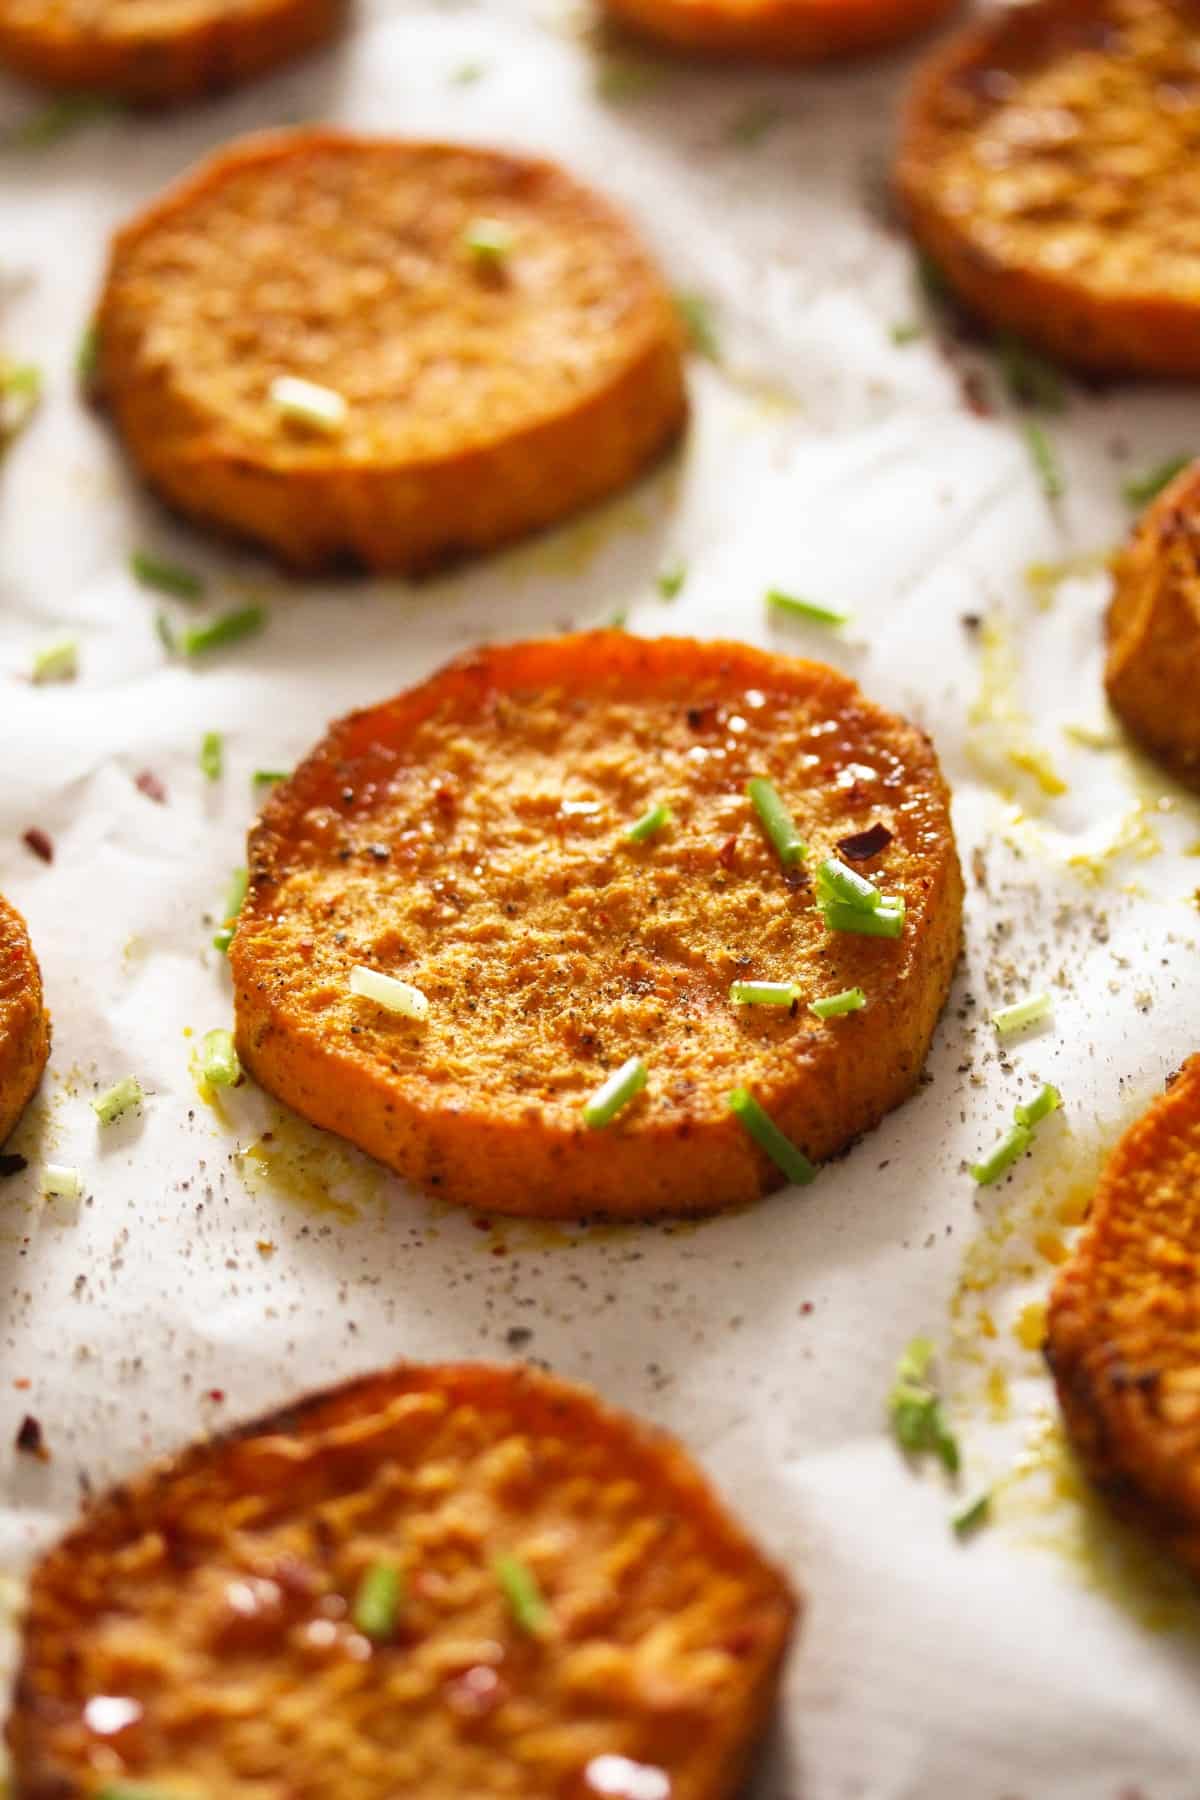 baked sweet potato rounds on a baking sheet lined with white parchment paper.